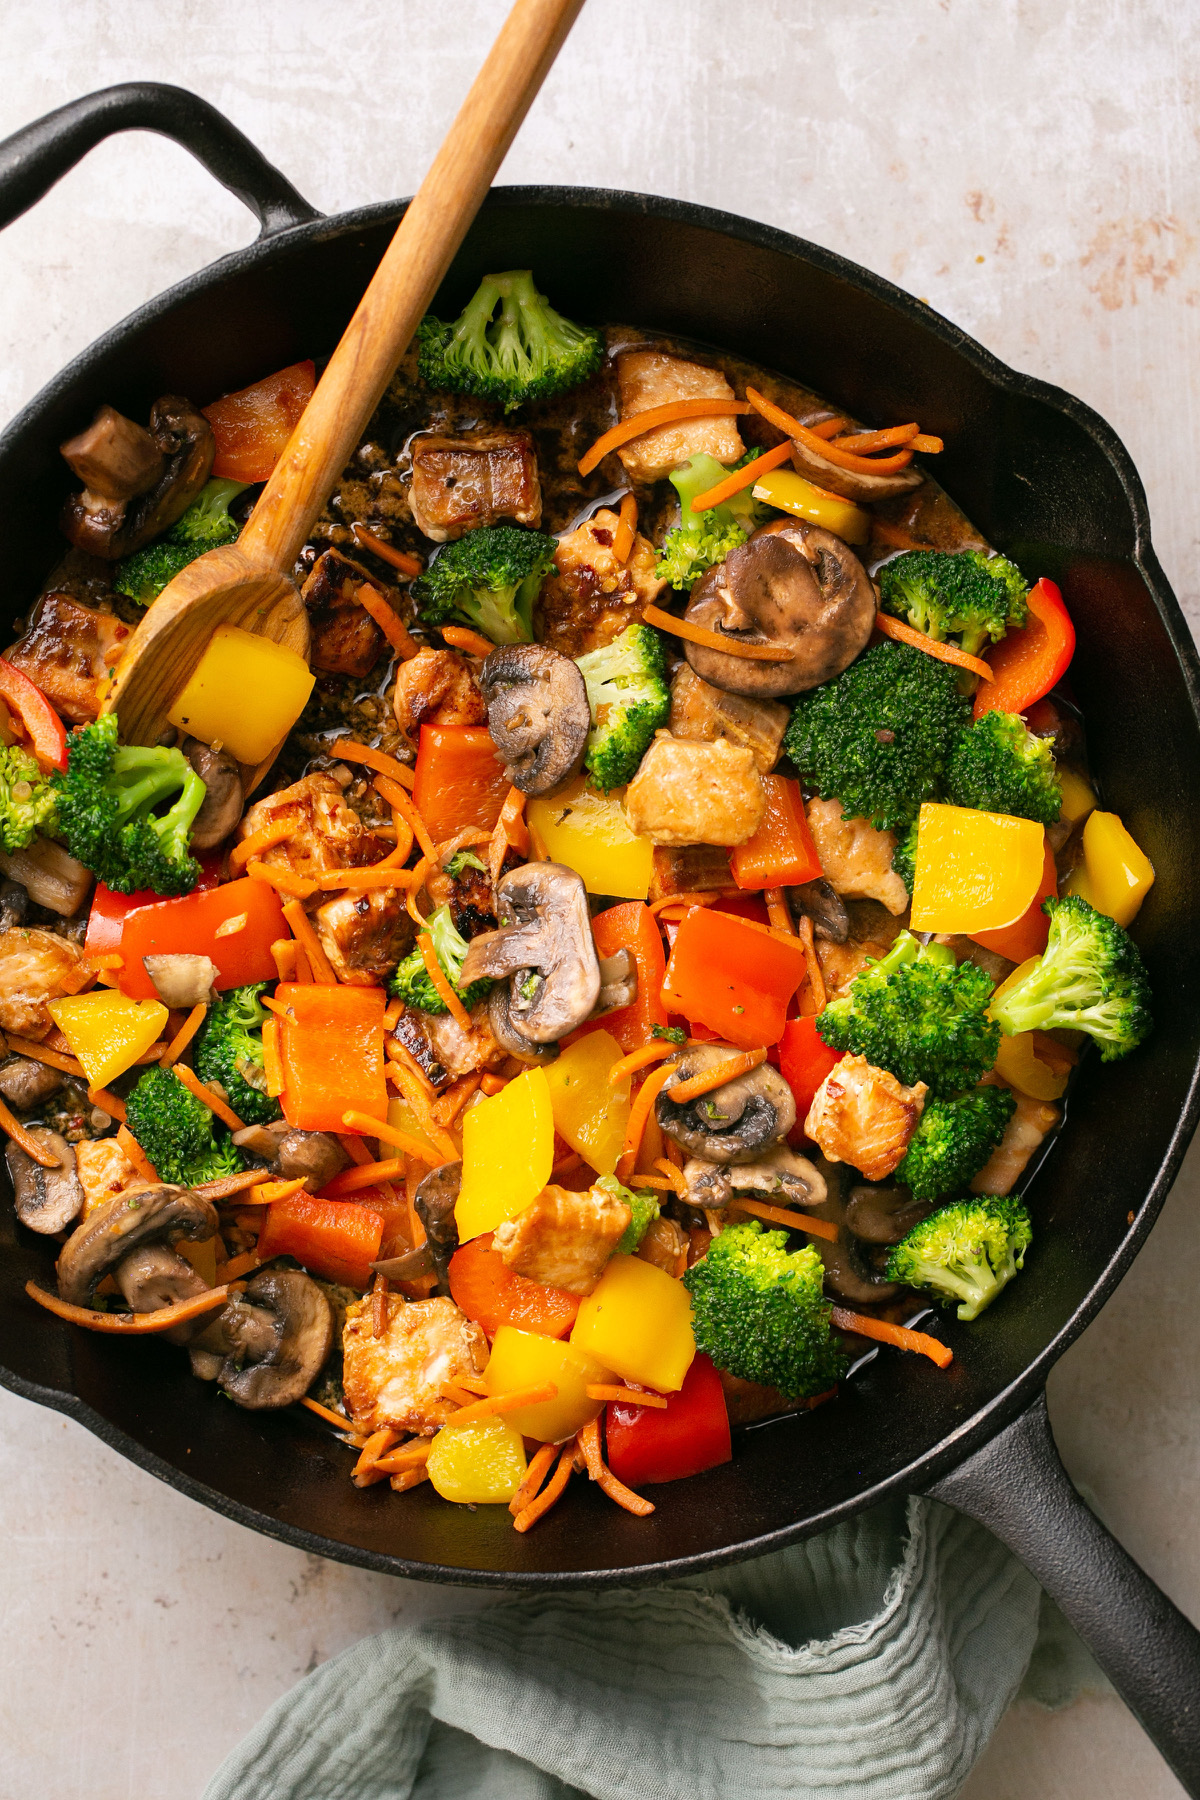 a closeup shot of a cast iron pan containing salmon, veggies, and stir fry sauce with a wooden spoon